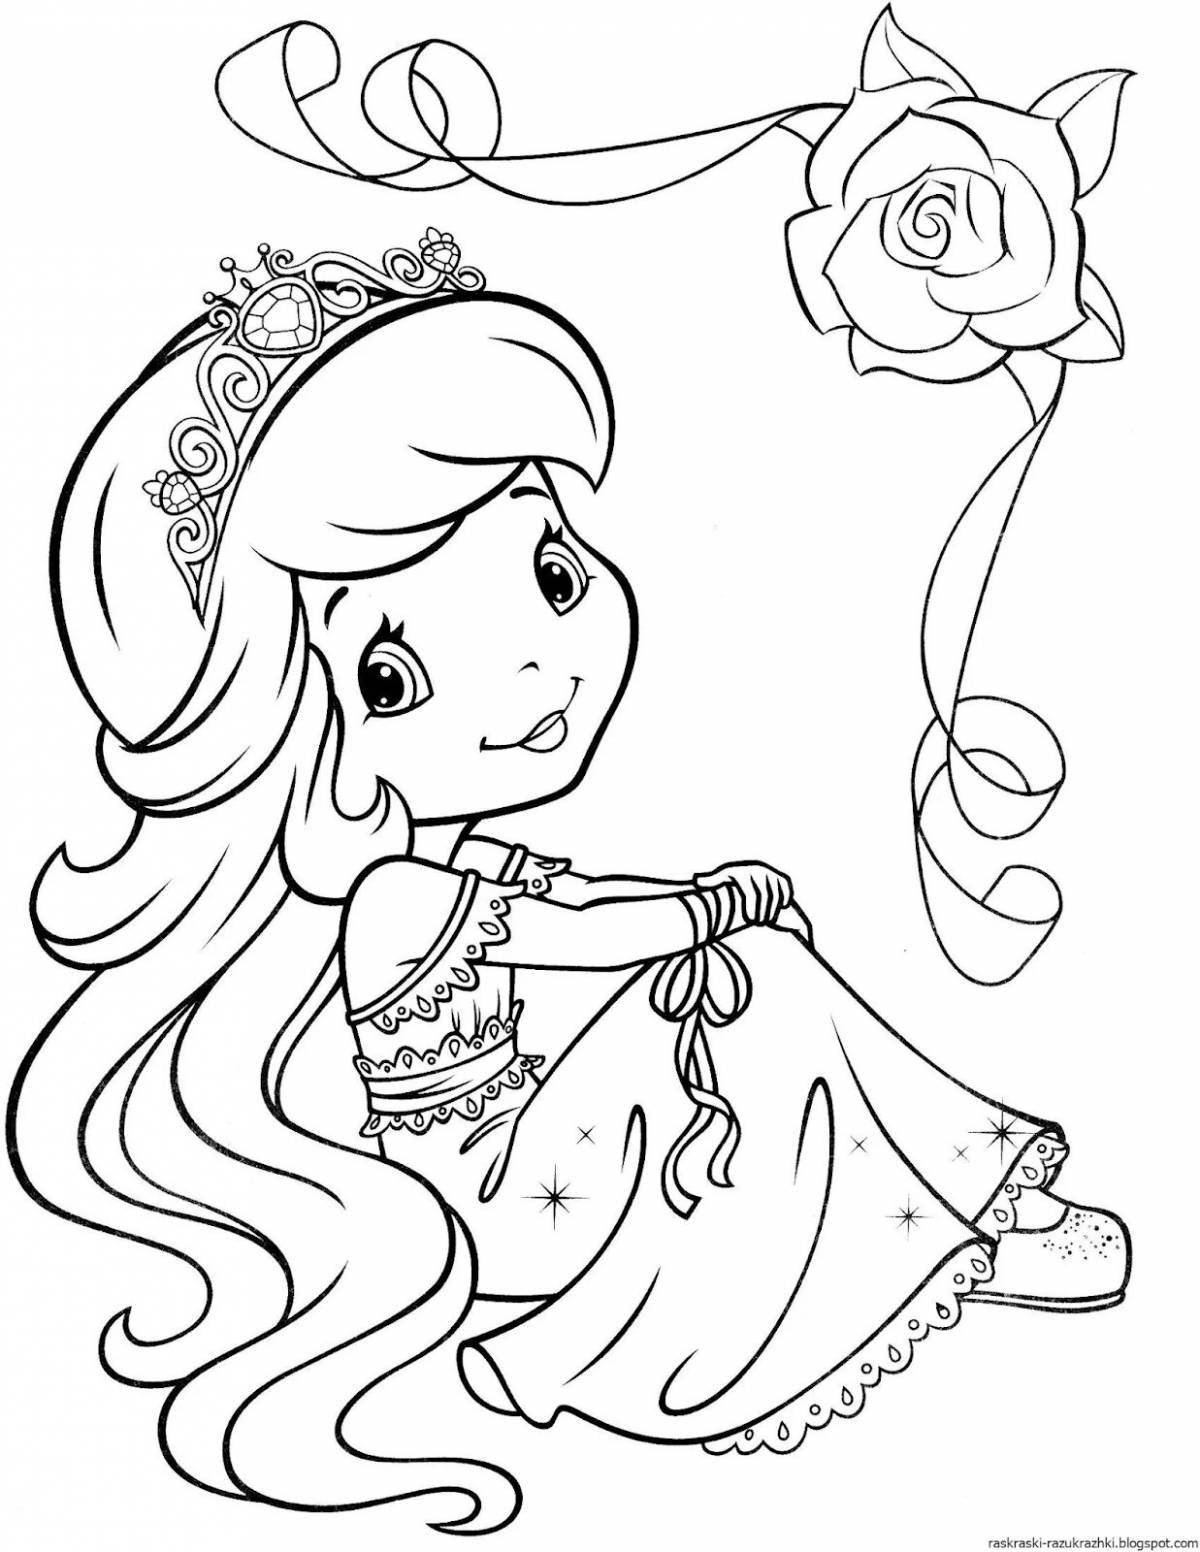 Fun coloring book for 6 year old girls